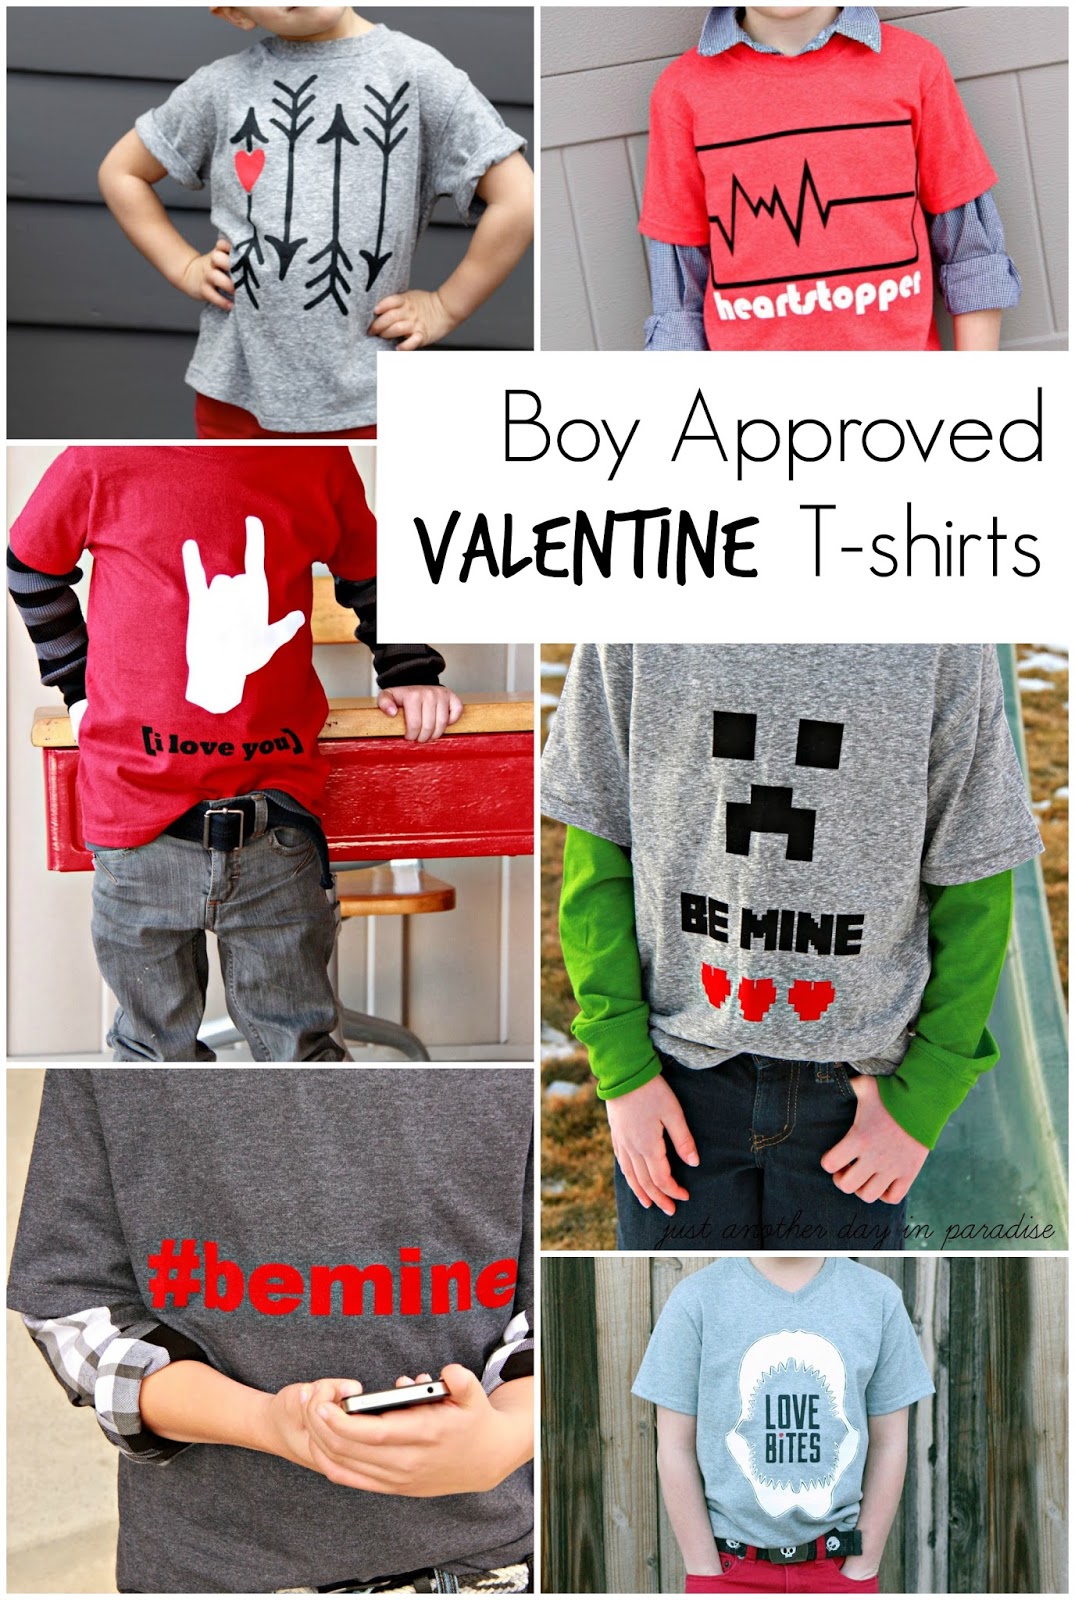 larissa-another-day-boy-approved-valentine-t-shirts